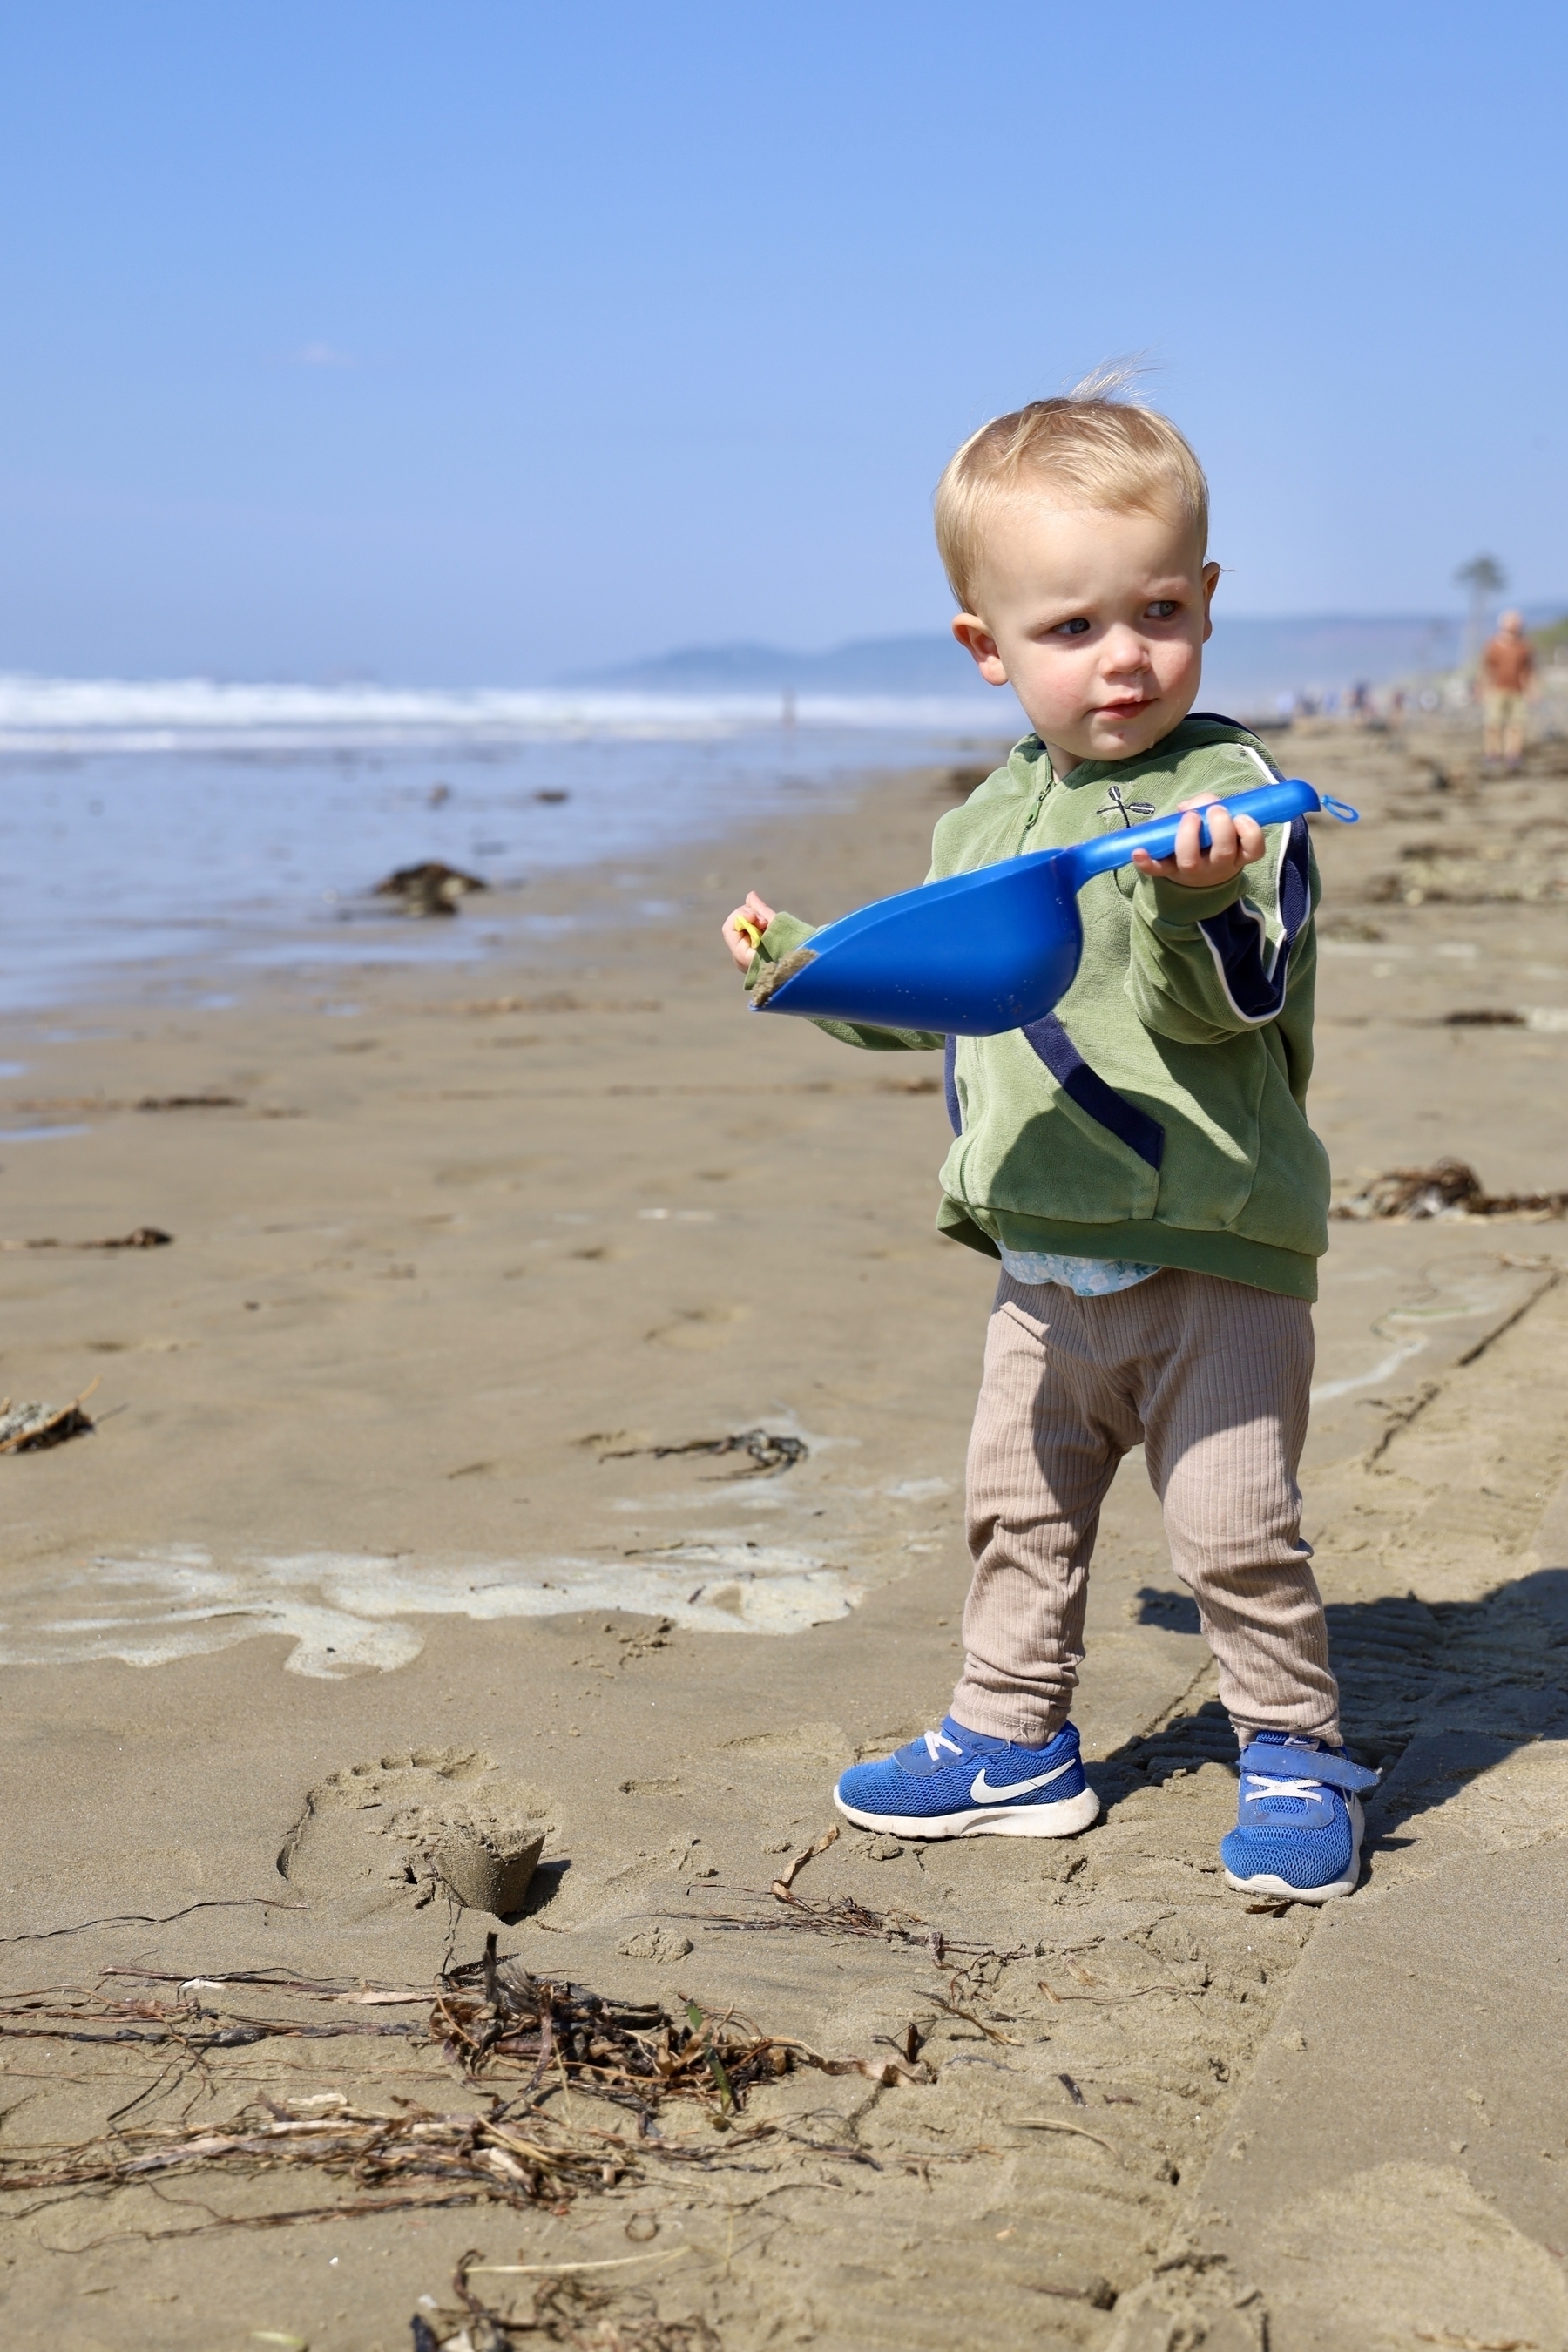 A 19-month-old toddler uses a blue scooper to pick up sand at the beach. 